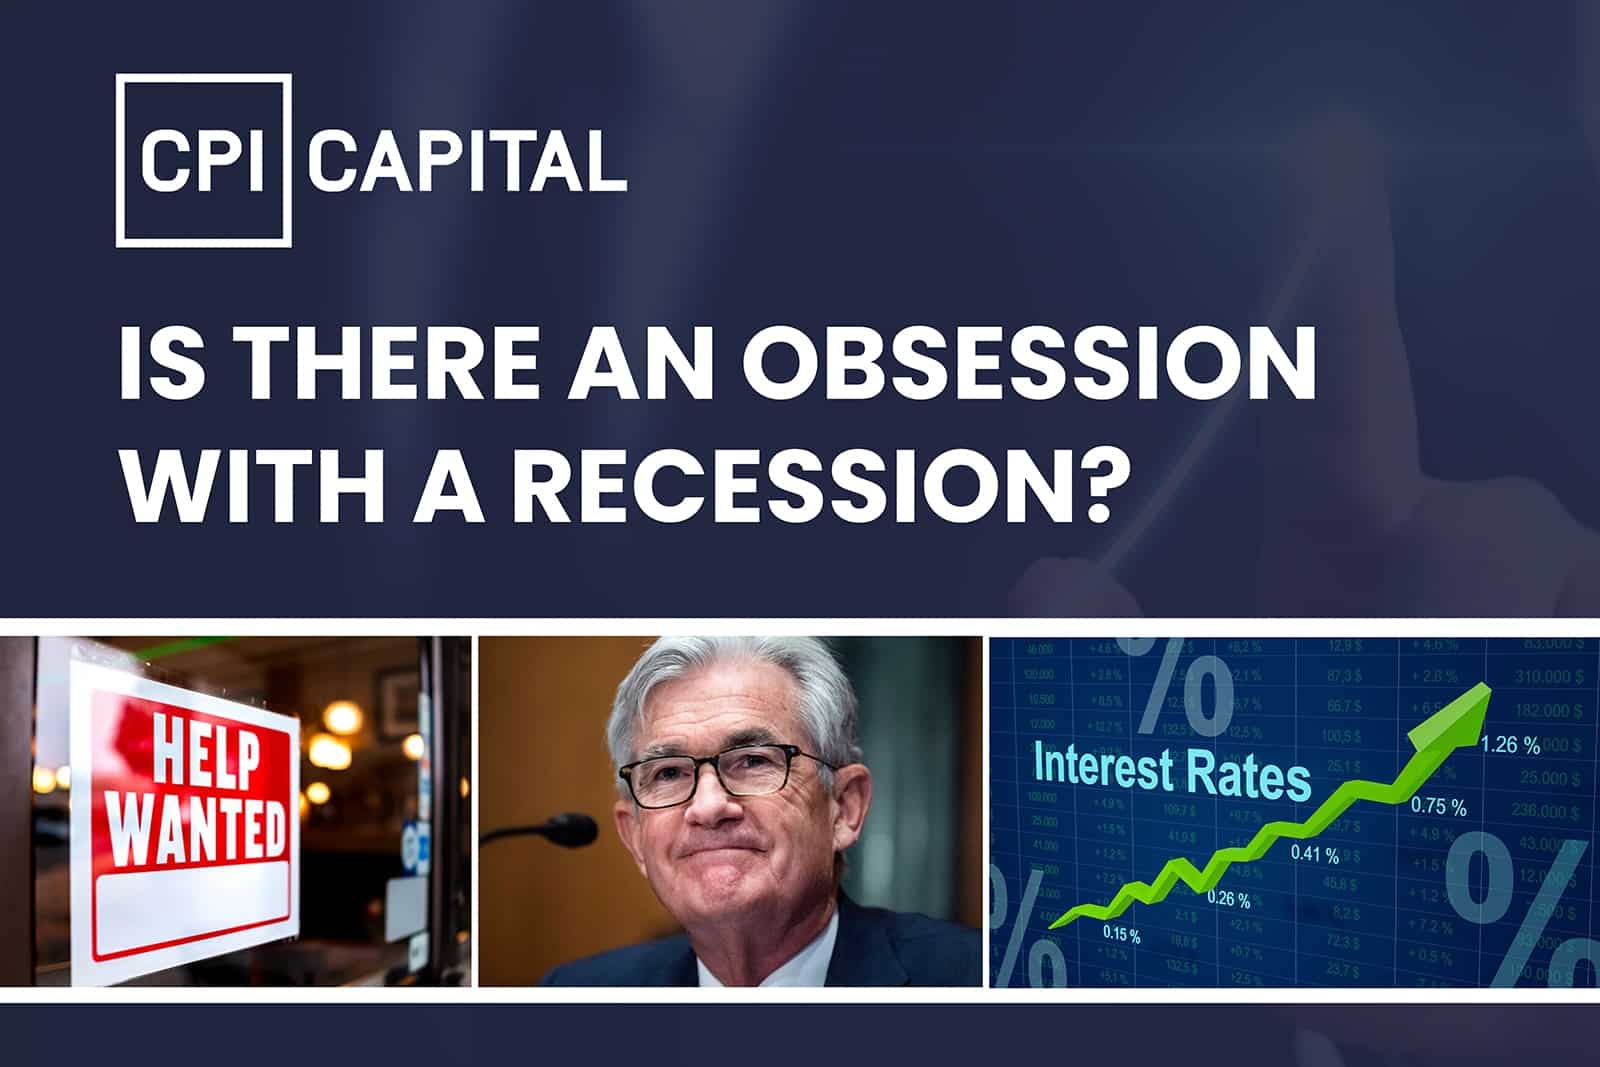 Is there an obsession with a recession?